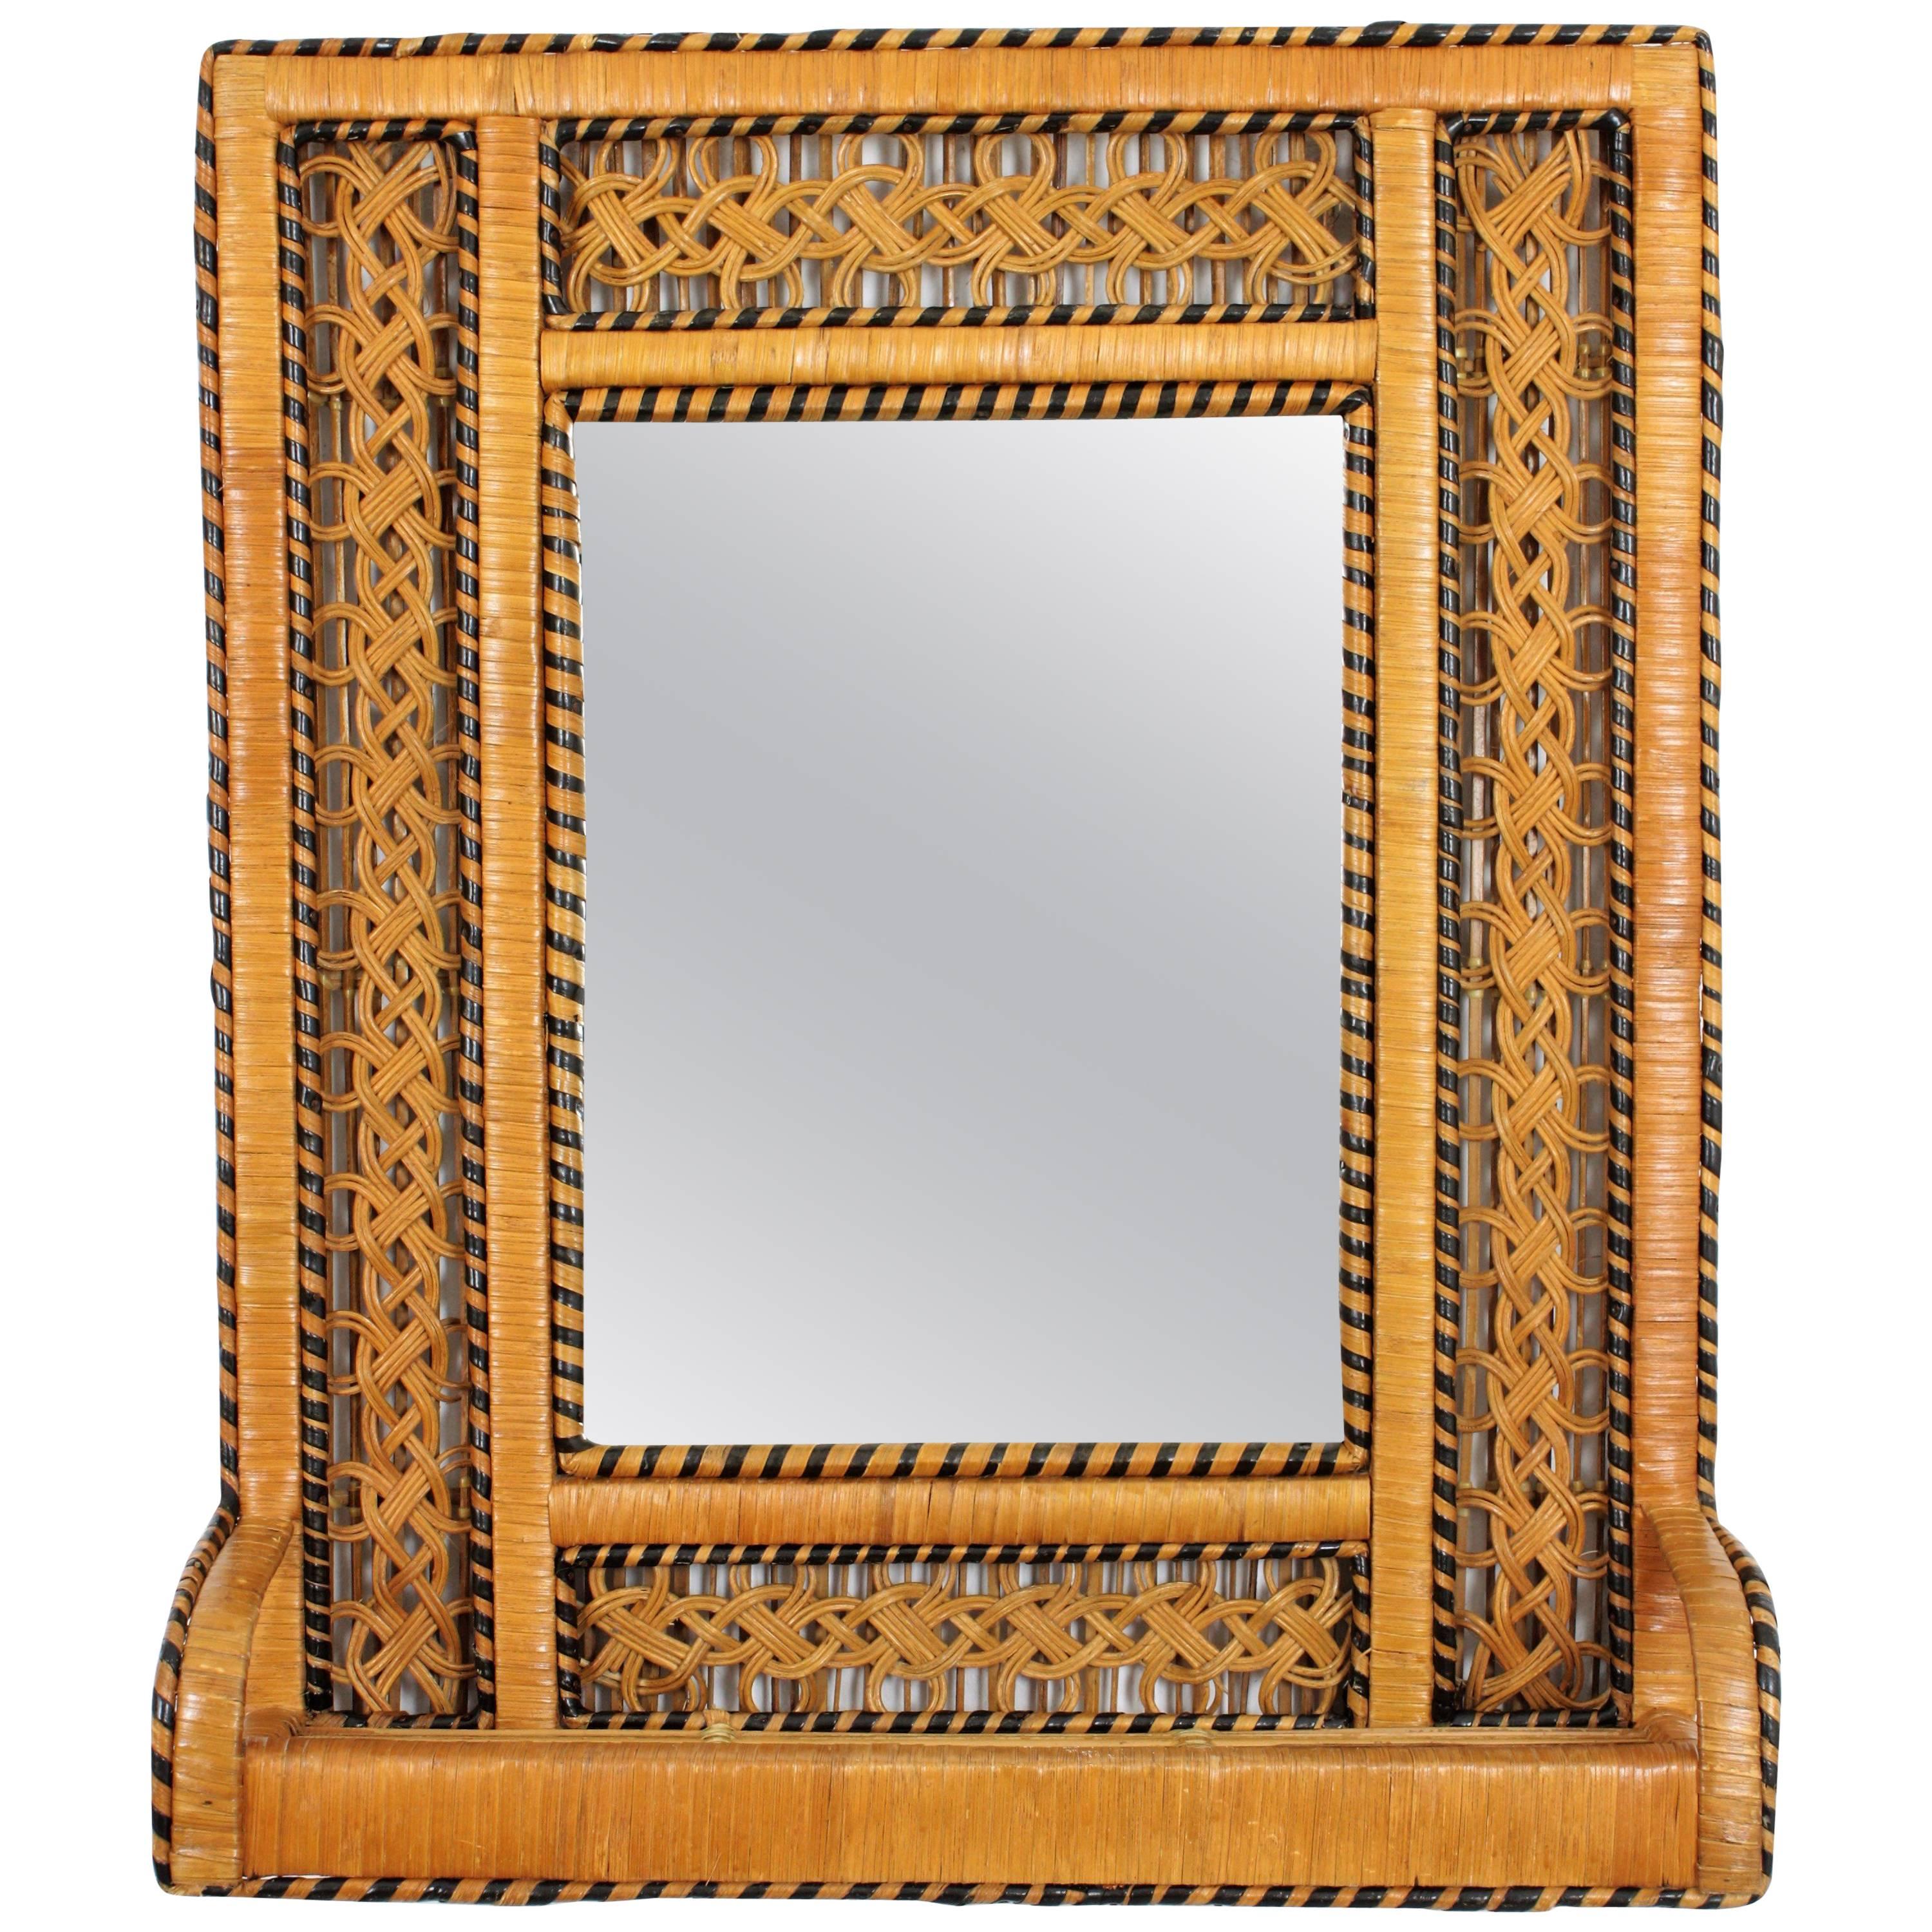 Lovely boho style handwoven rattan and wicker shelf mirror with black accents in the manner of the Emmanuelle peacock chair. Spain, circa 1960-1970s.
The frame has a meticulous handcrafted braided work that makes this piece full of beautiful